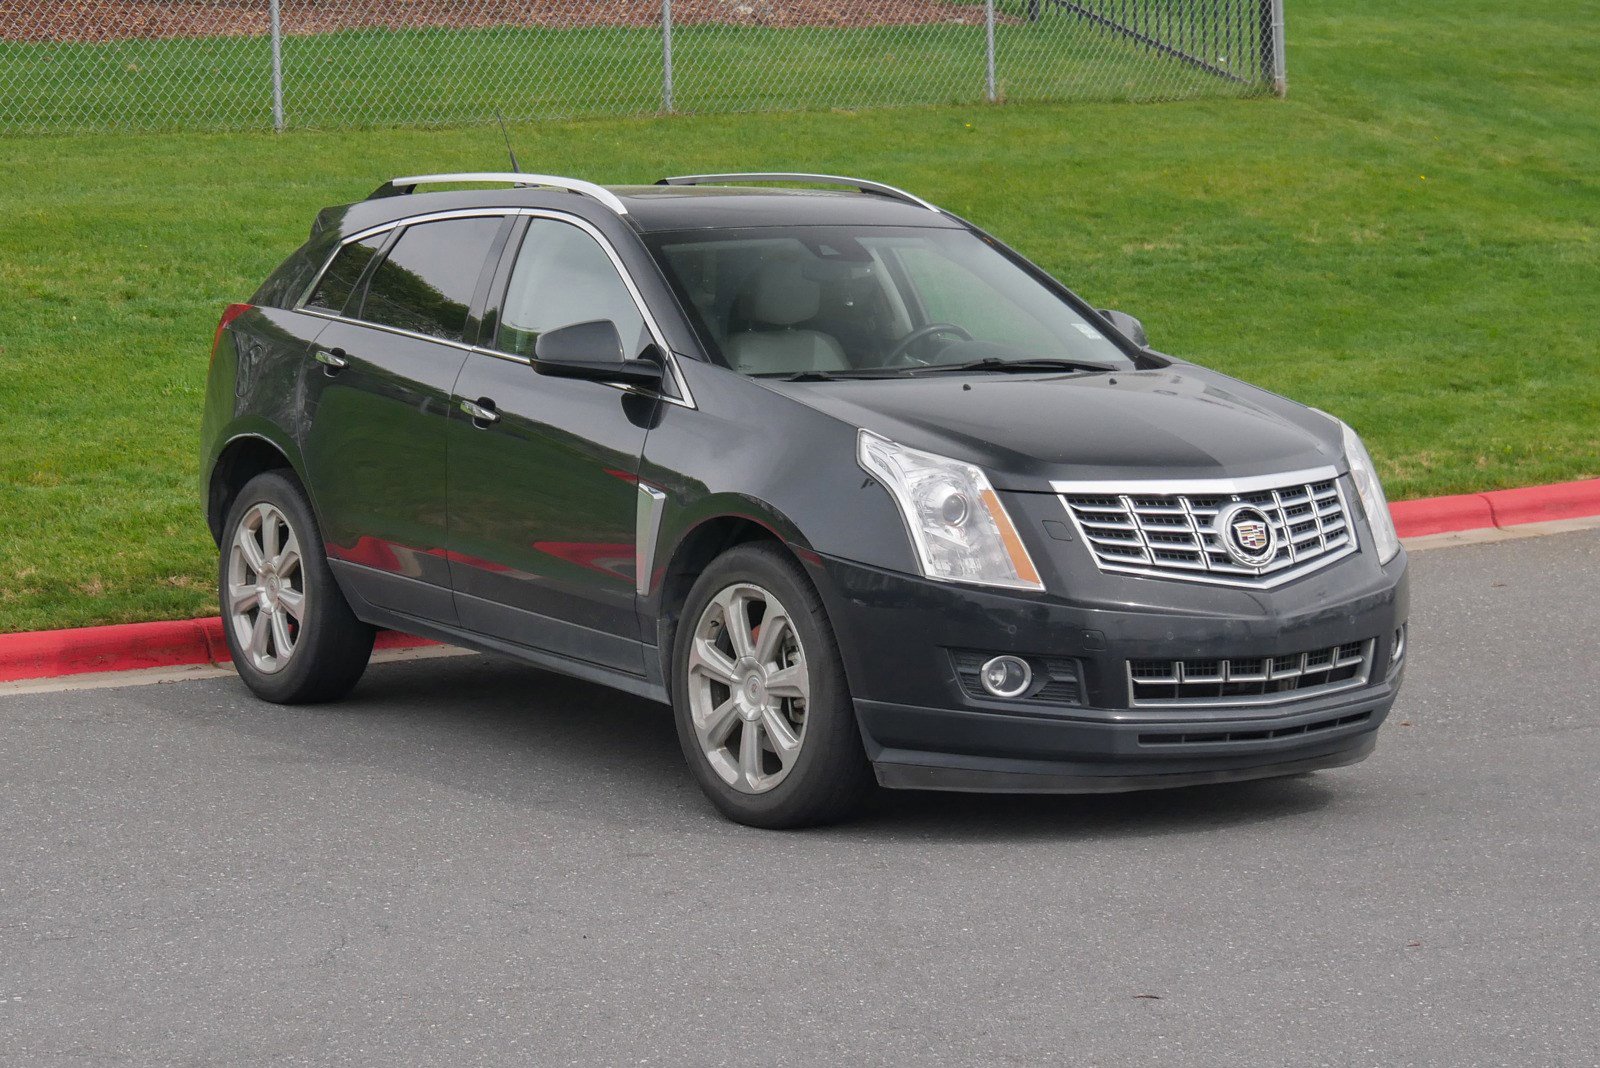 Pre-Owned 2013 Cadillac SRX Performance Collection SUV in Cary #PB6840A |  Hendrick Dodge Cary